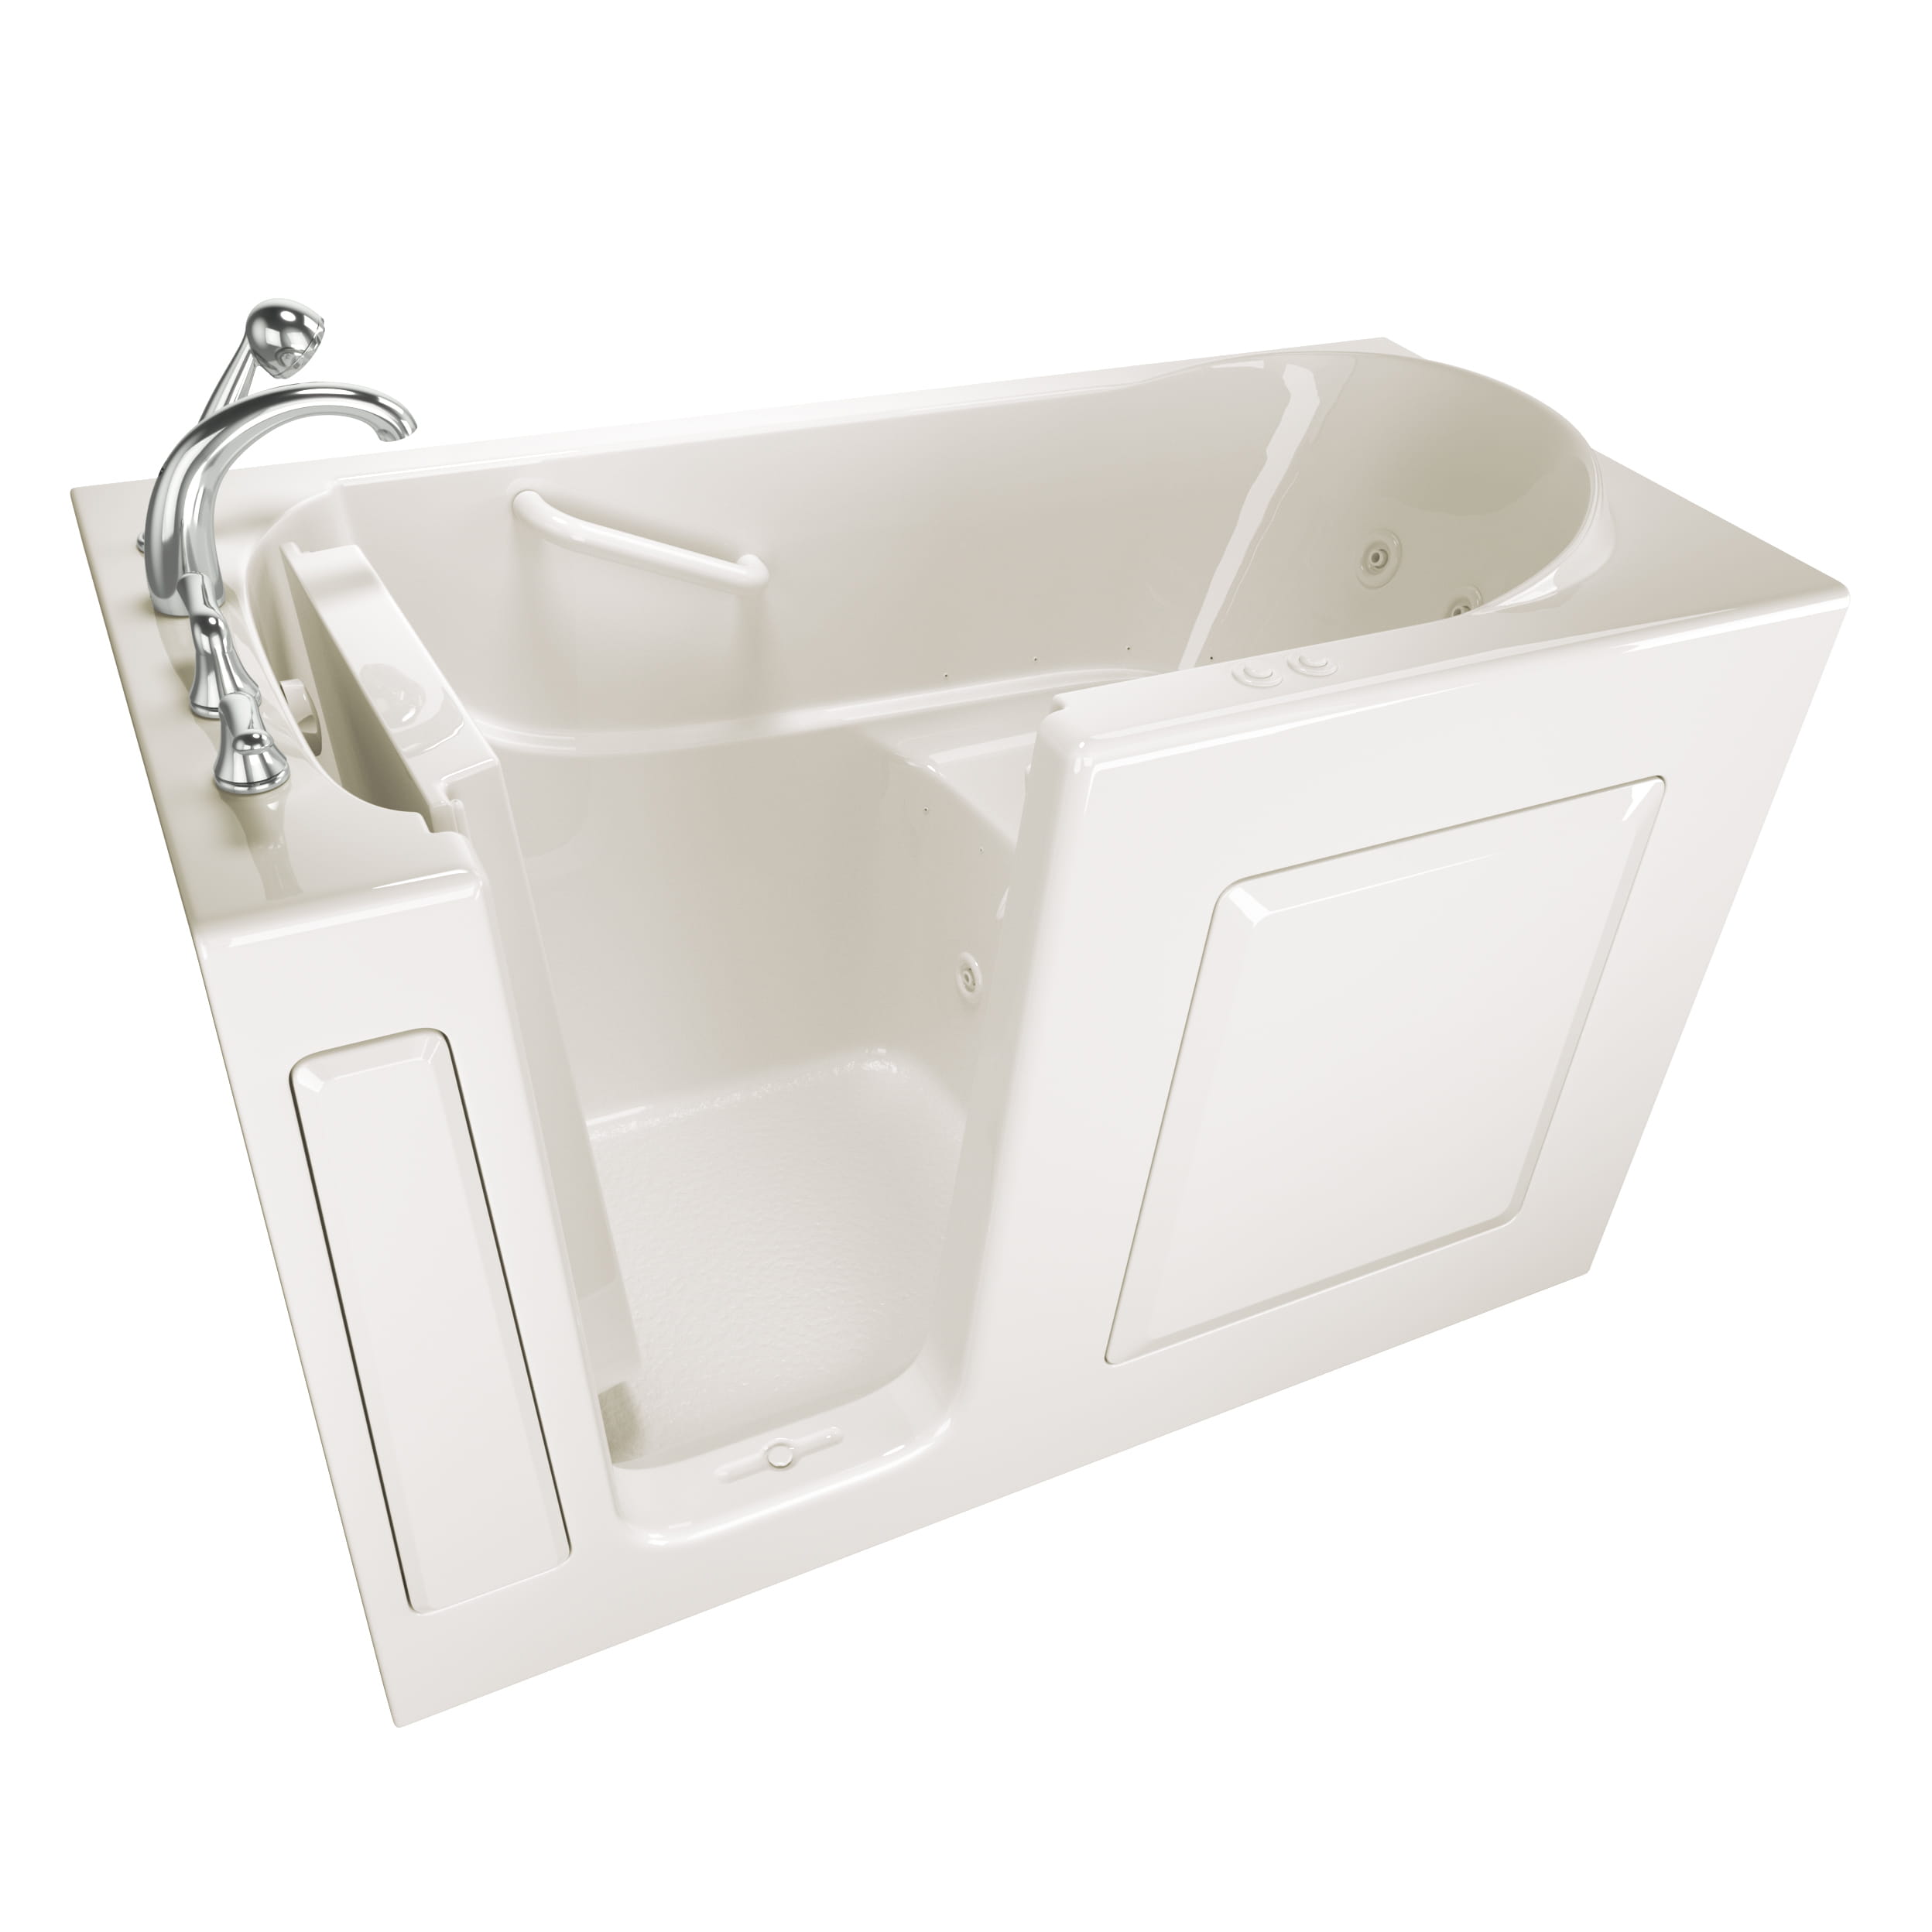 Gelcoat Entry Series 60 x 30 Inch Walk In Tub With Combination Air Spa and Whirlpool Systems - Left Hand Drain With Faucet ST BISCUIT